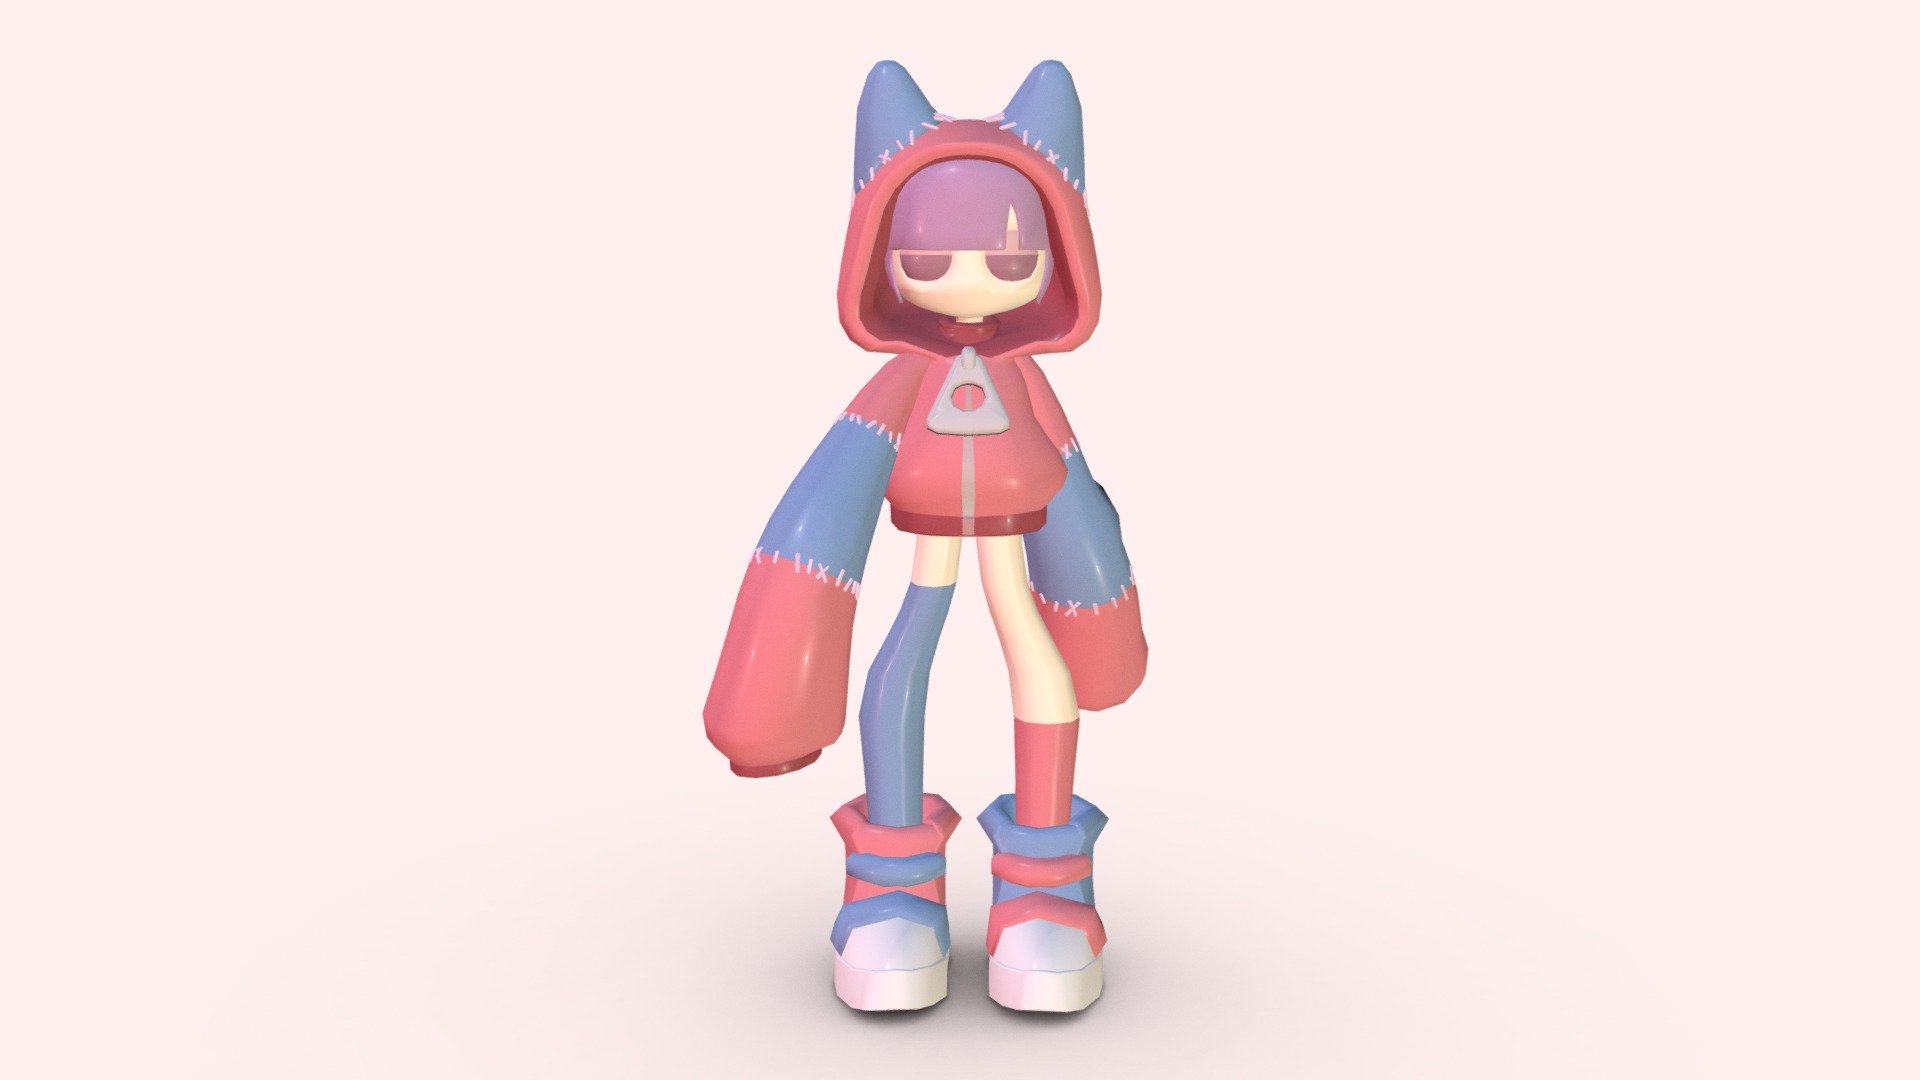 Model in Maya

Collectable toy - City Cat series. 
feel free to 3D print 3d model